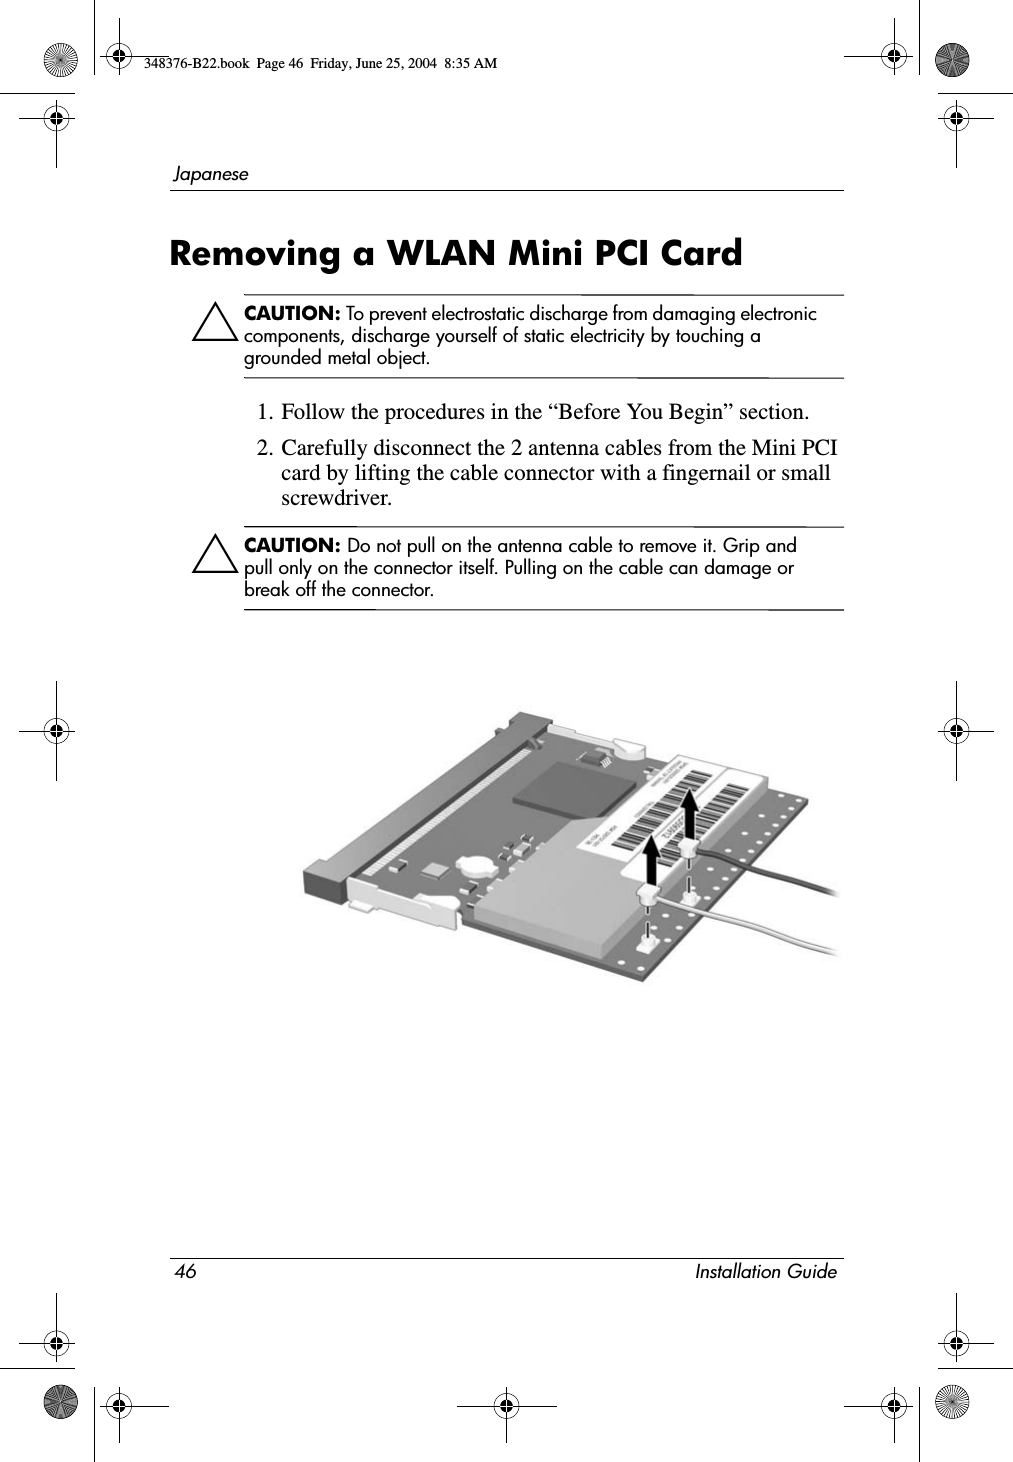 46 Installation GuideJapaneseRemoving a WLAN Mini PCI CardÄCAUTION: To prevent electrostatic discharge from damaging electronic components, discharge yourself of static electricity by touching a grounded metal object.1. Follow the procedures in the “Before You Begin” section.2. Carefully disconnect the 2 antenna cables from the Mini PCI card by lifting the cable connector with a fingernail or small screwdriver.ÄCAUTION: Do not pull on the antenna cable to remove it. Grip and pull only on the connector itself. Pulling on the cable can damage or break off the connector.348376-B22.book  Page 46  Friday, June 25, 2004  8:35 AM